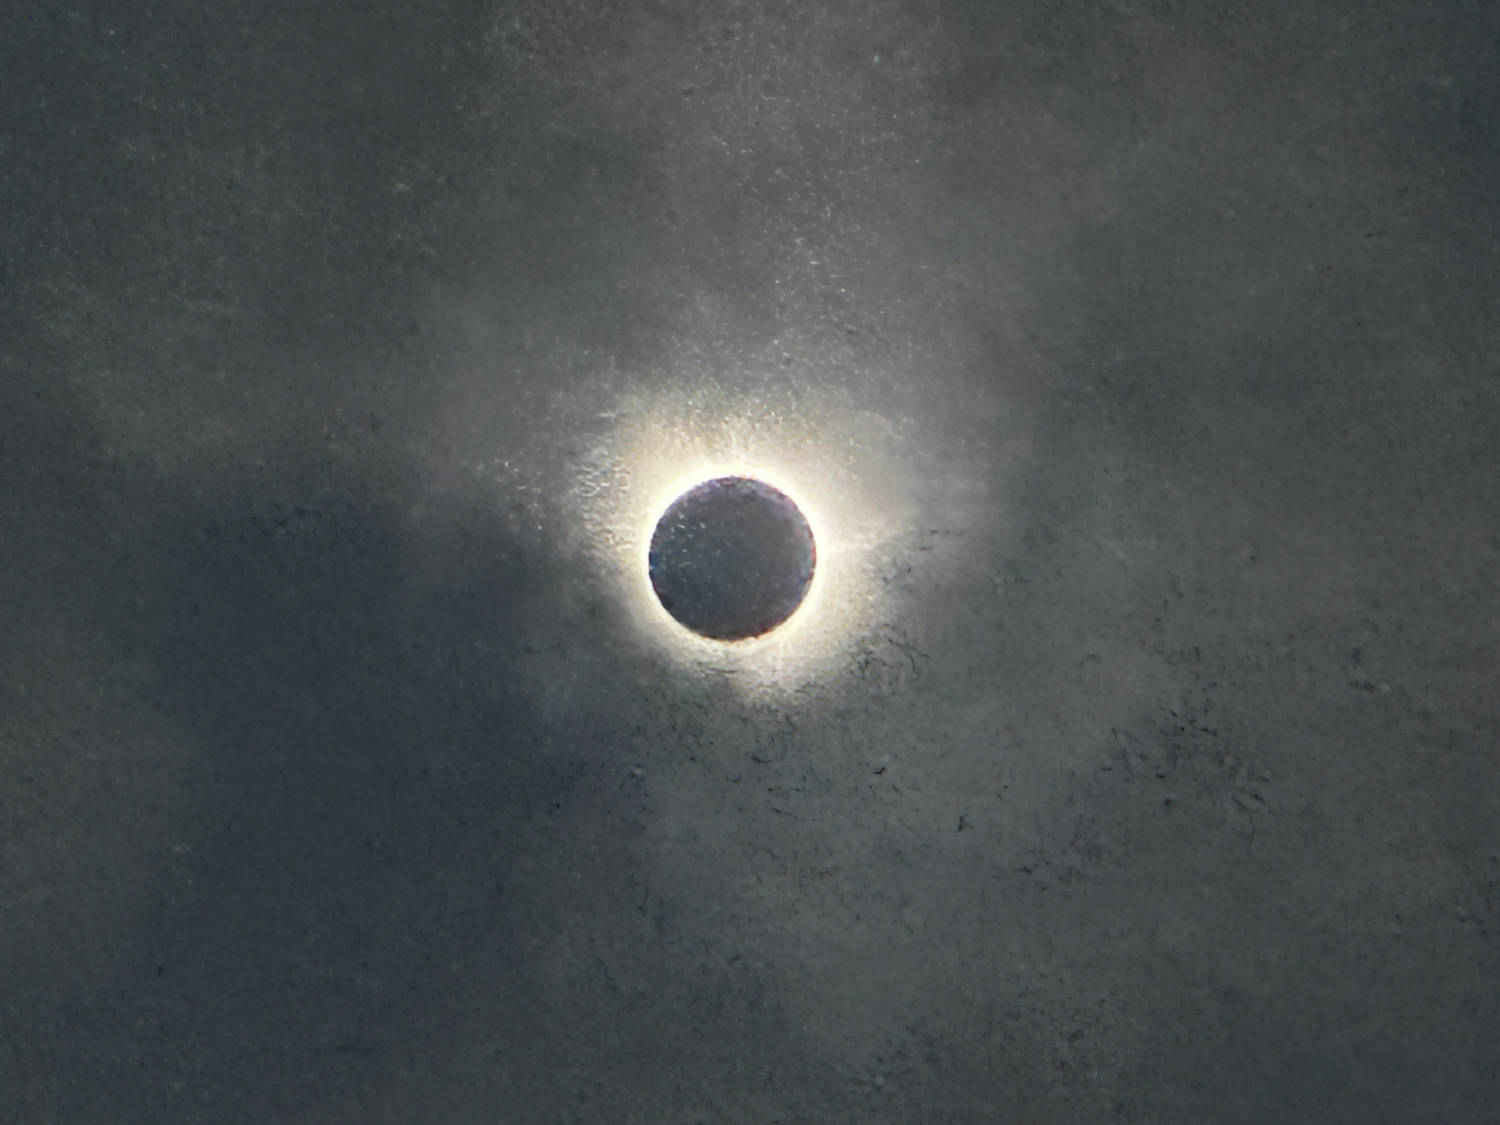 My view of the eclipse